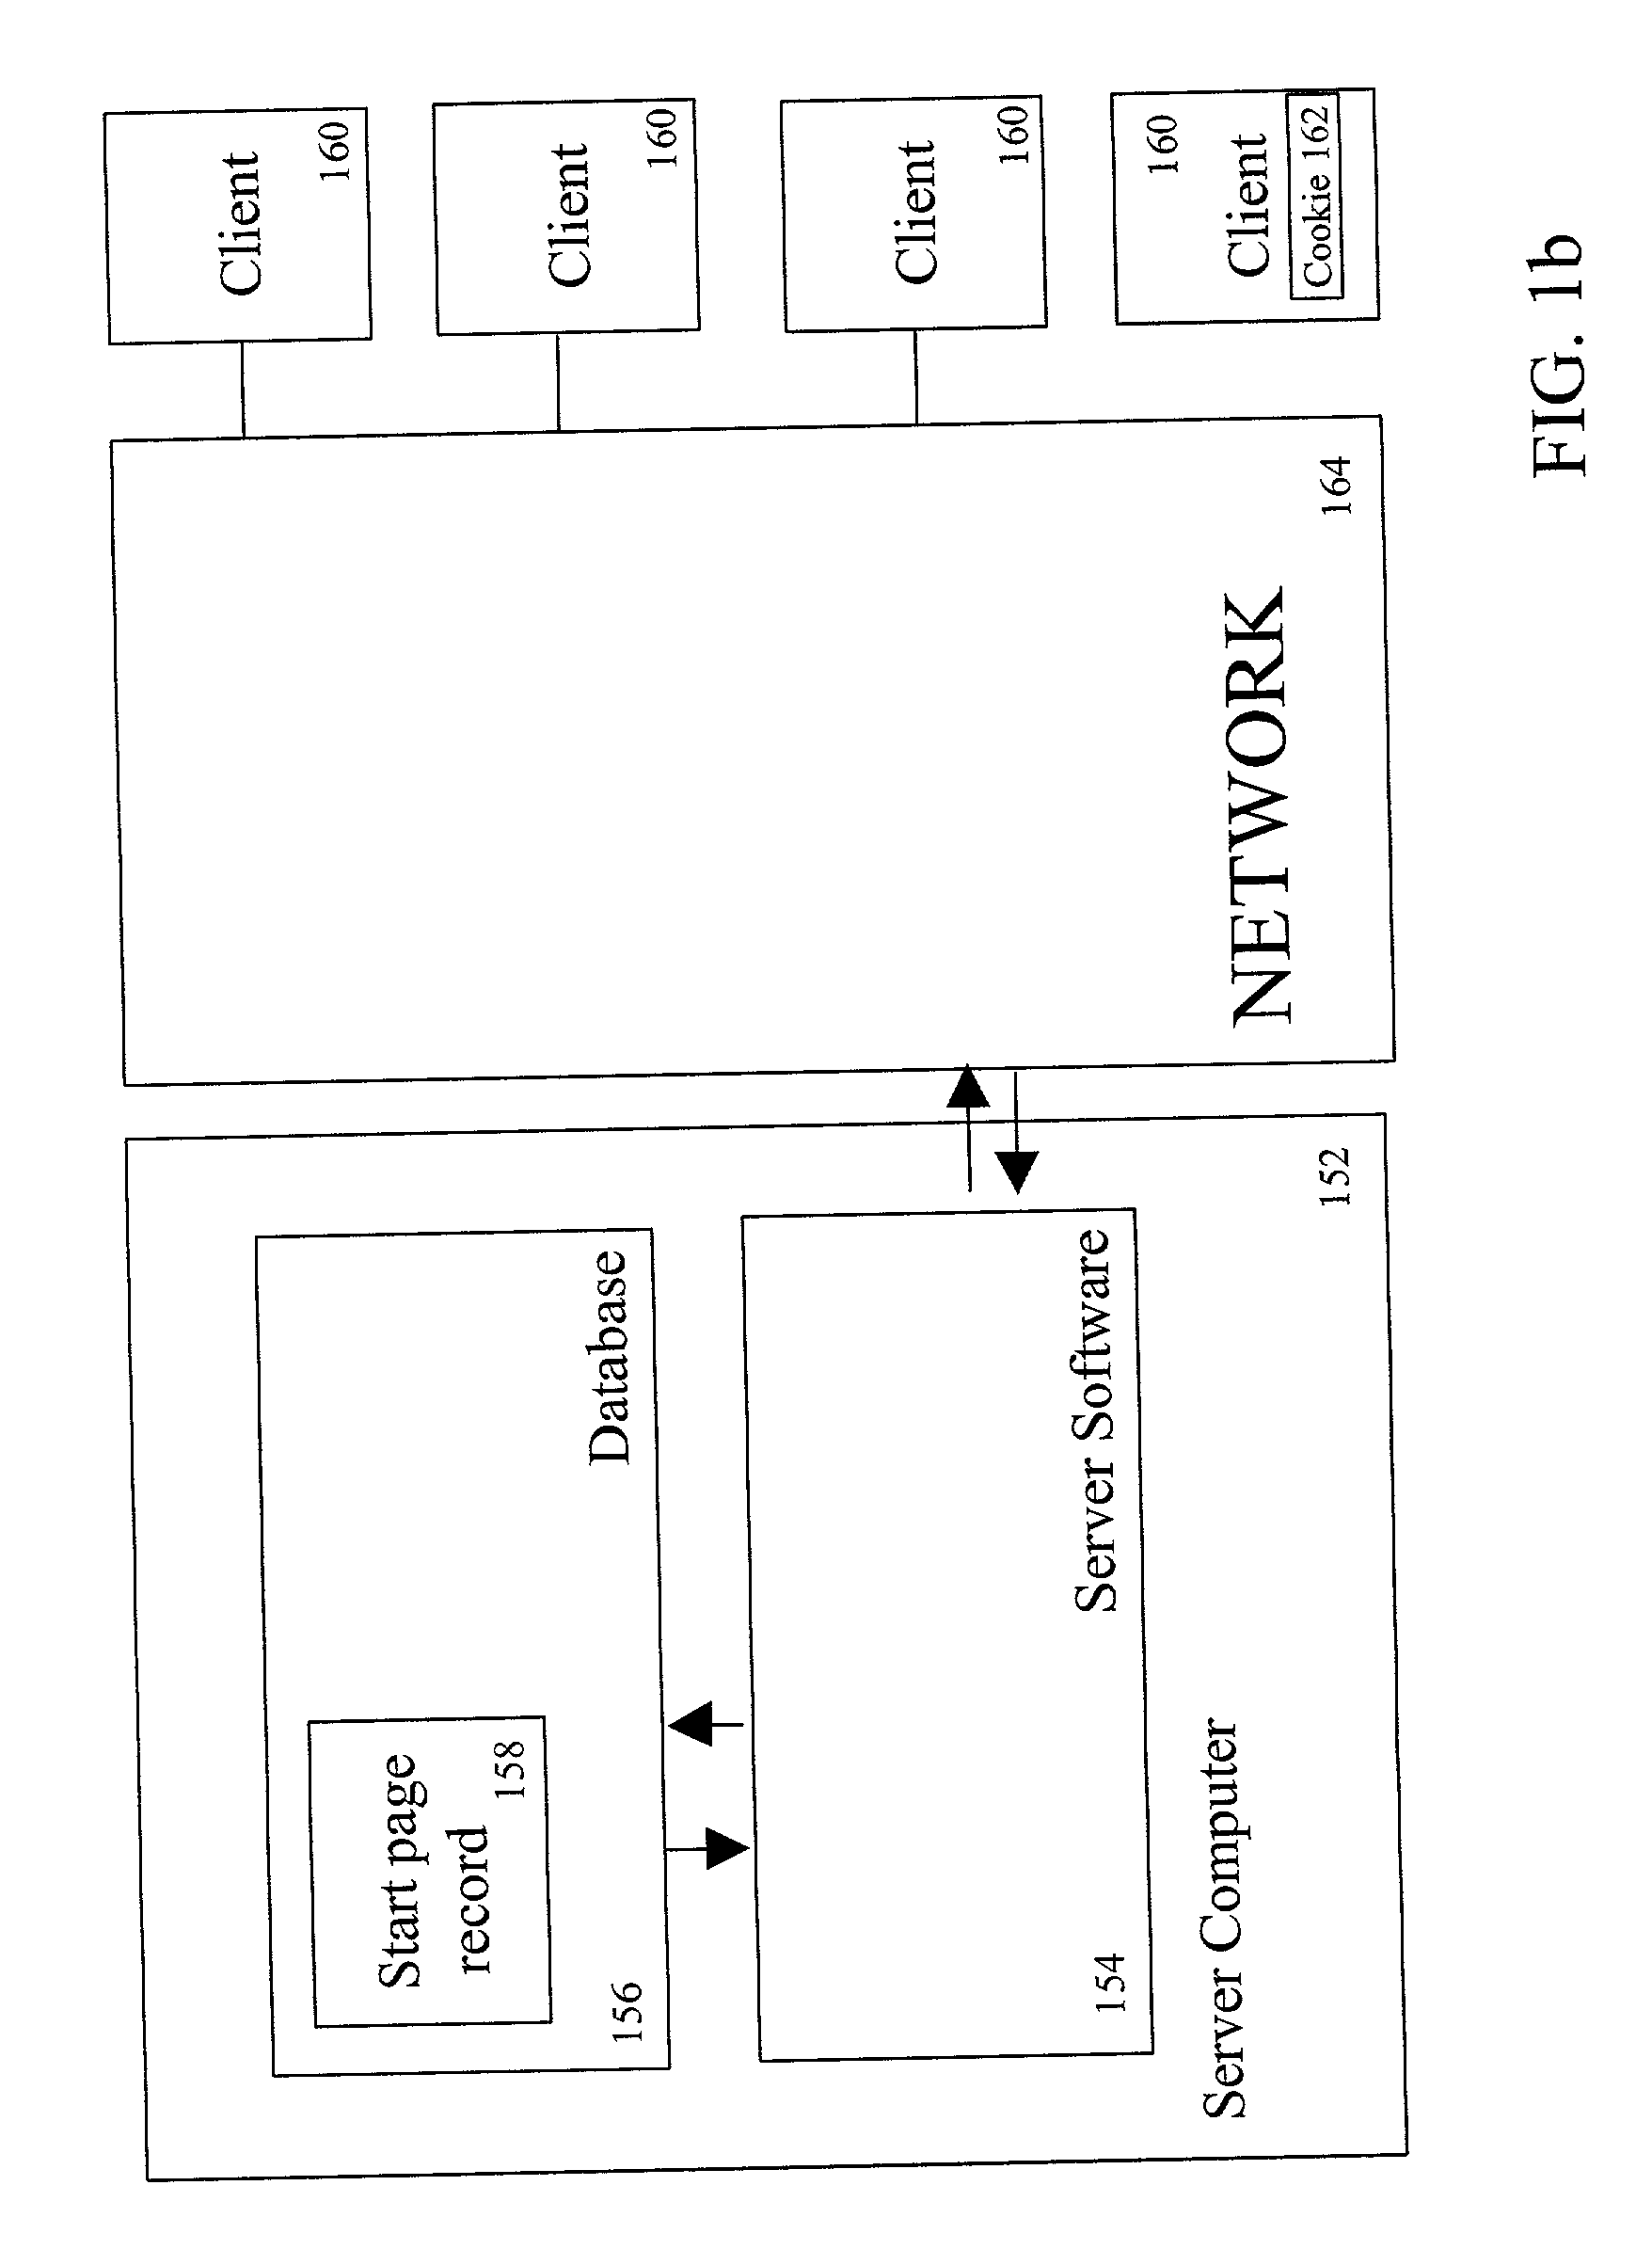 Method and apparatus for consolidating network information